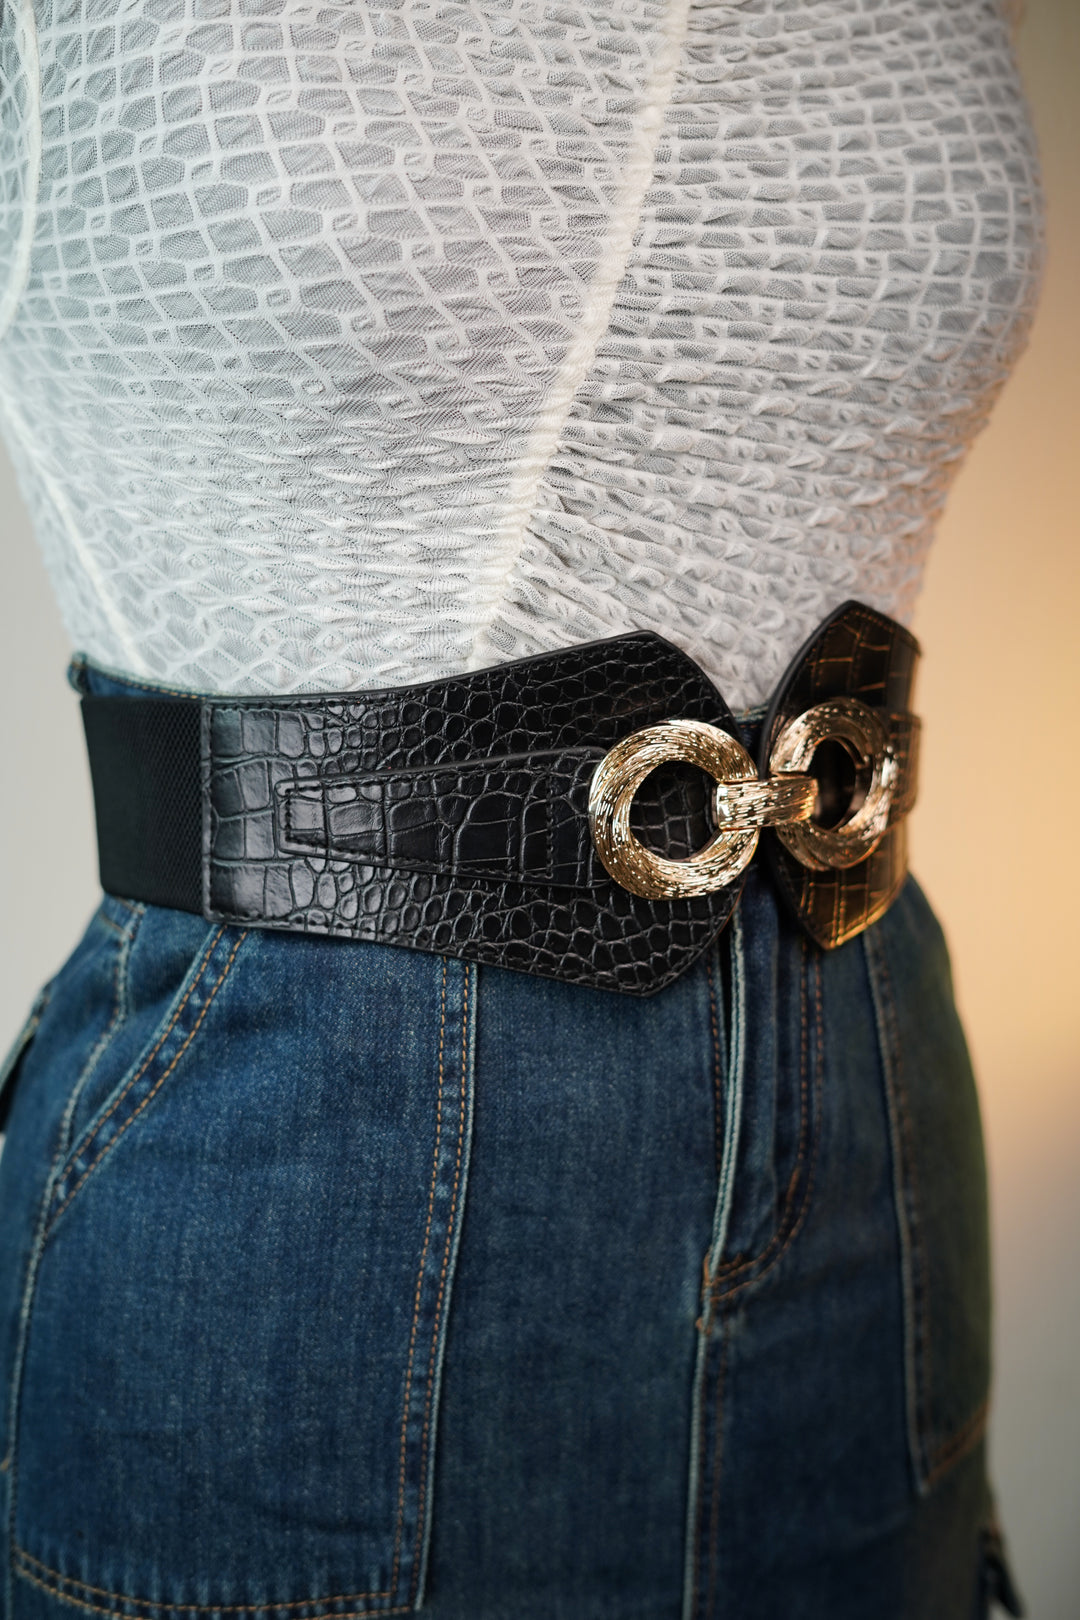 Chic Tanned Waist Belt with Circlet Hook